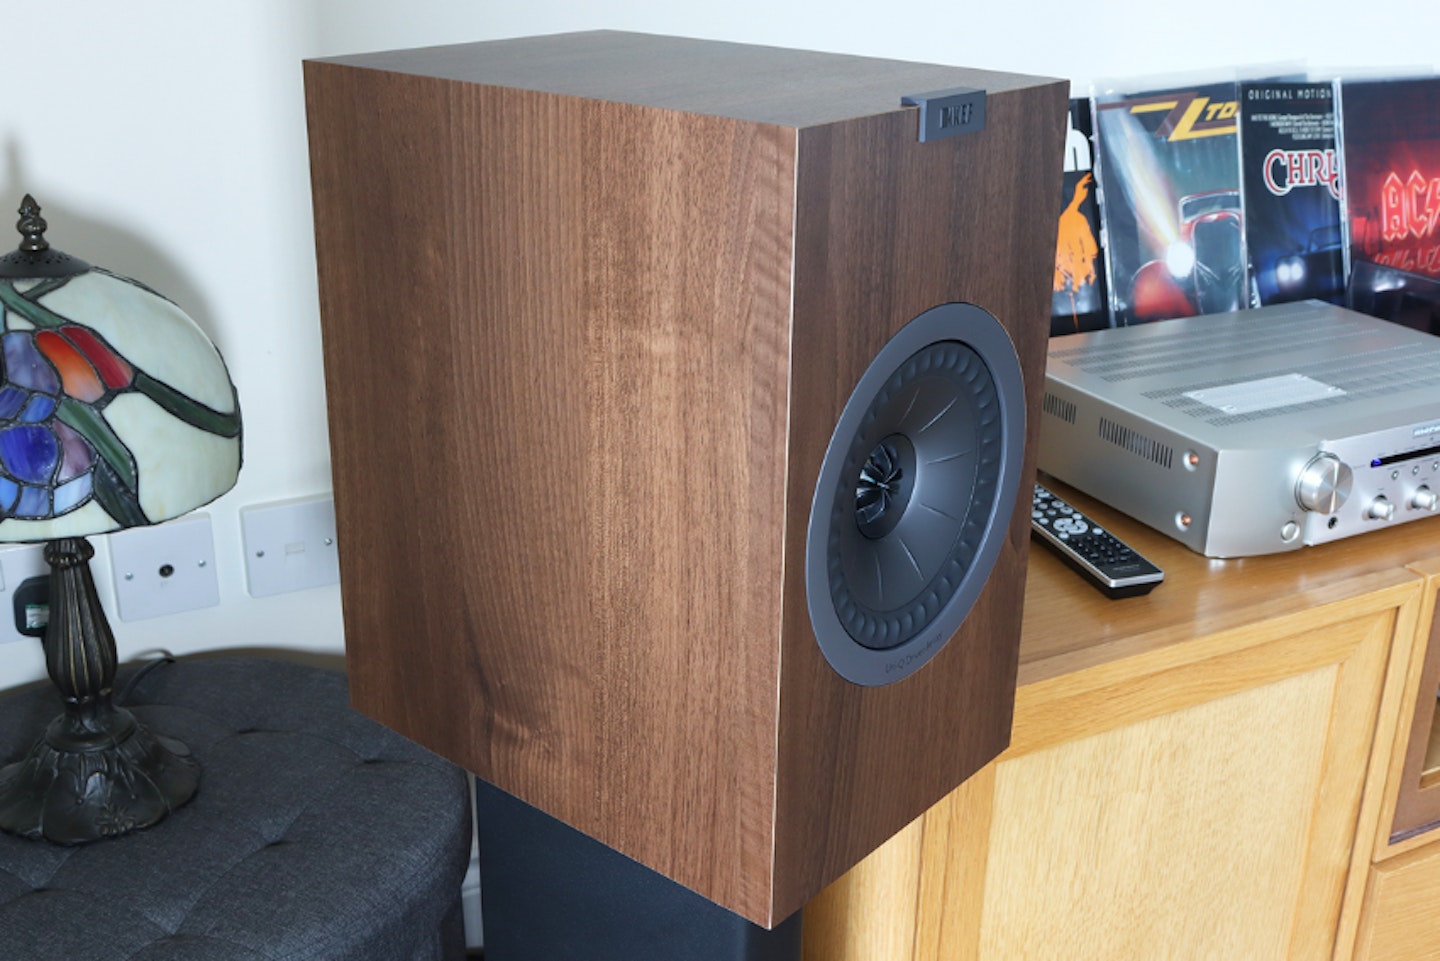 KEF speaker and an amp